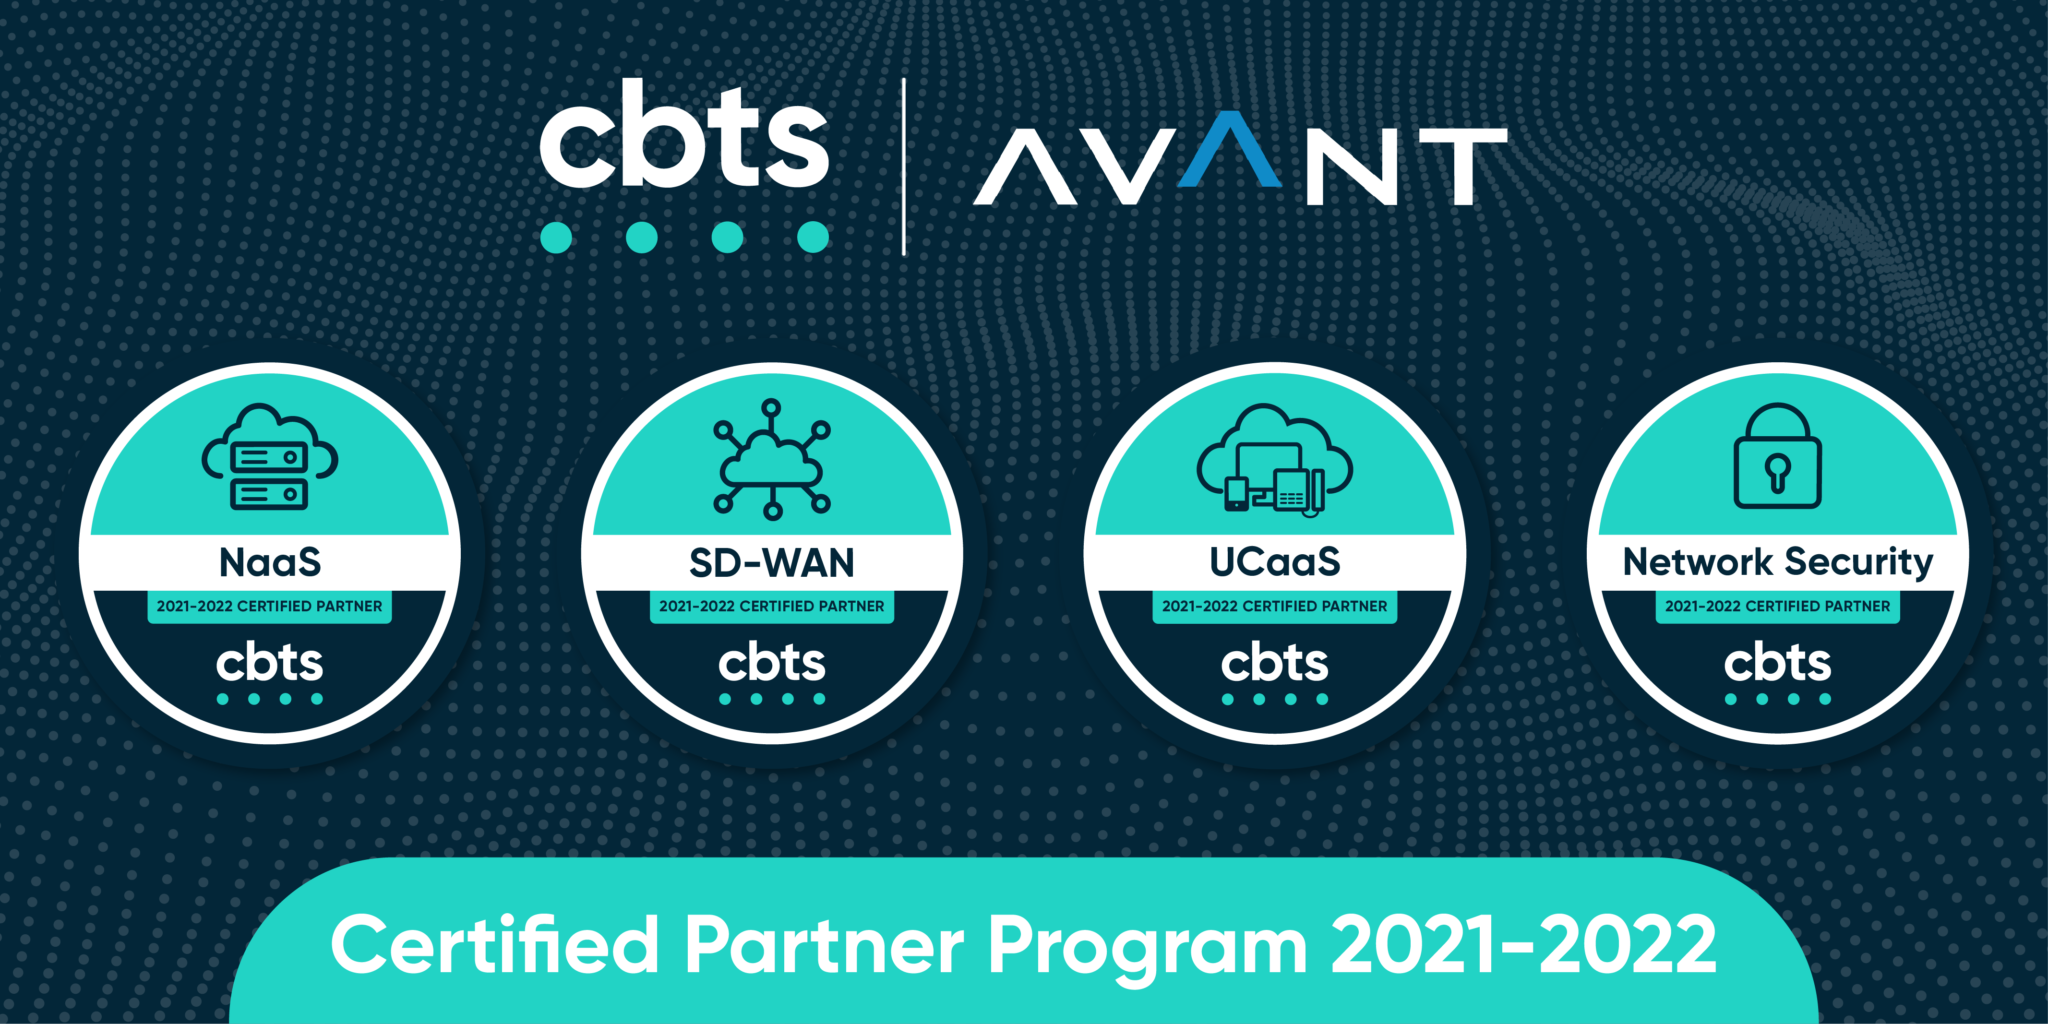 AVANT Communications Engineering Team is the first master agent to receive all four certifications